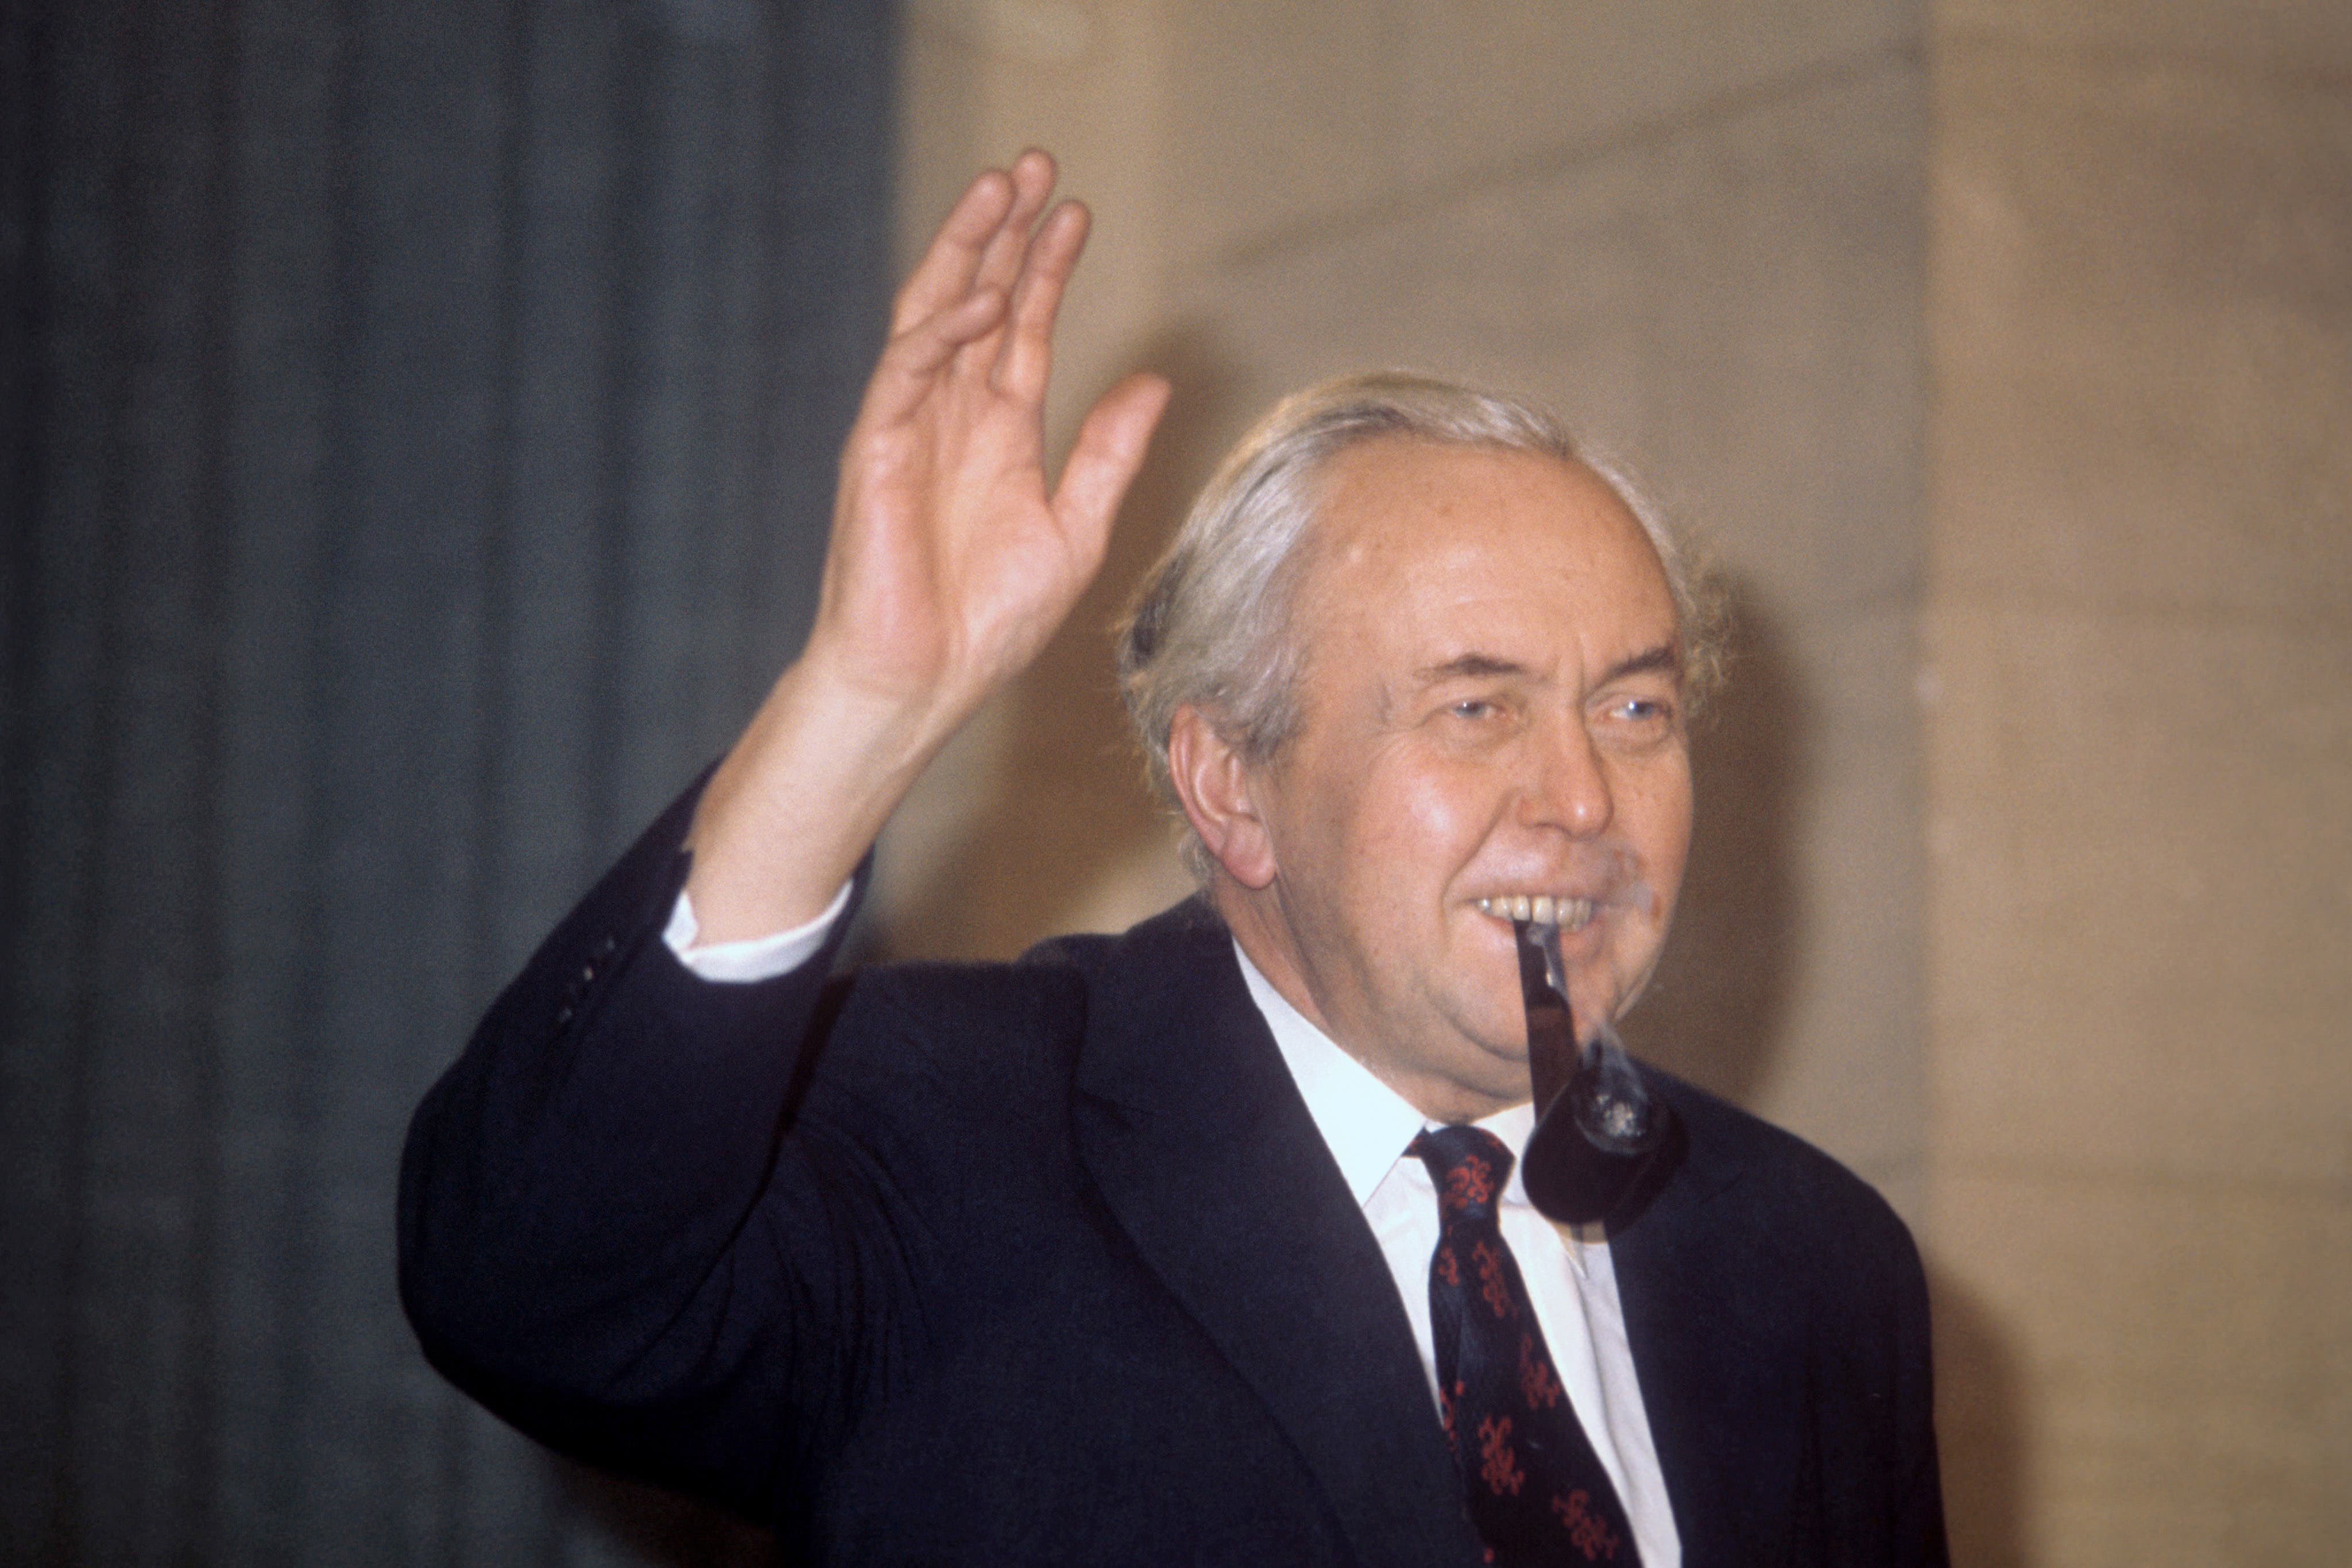 Harold Wilson had an affair with his deputy press secretary during his final years in Downing Street, his former advisers have revealed (PA)